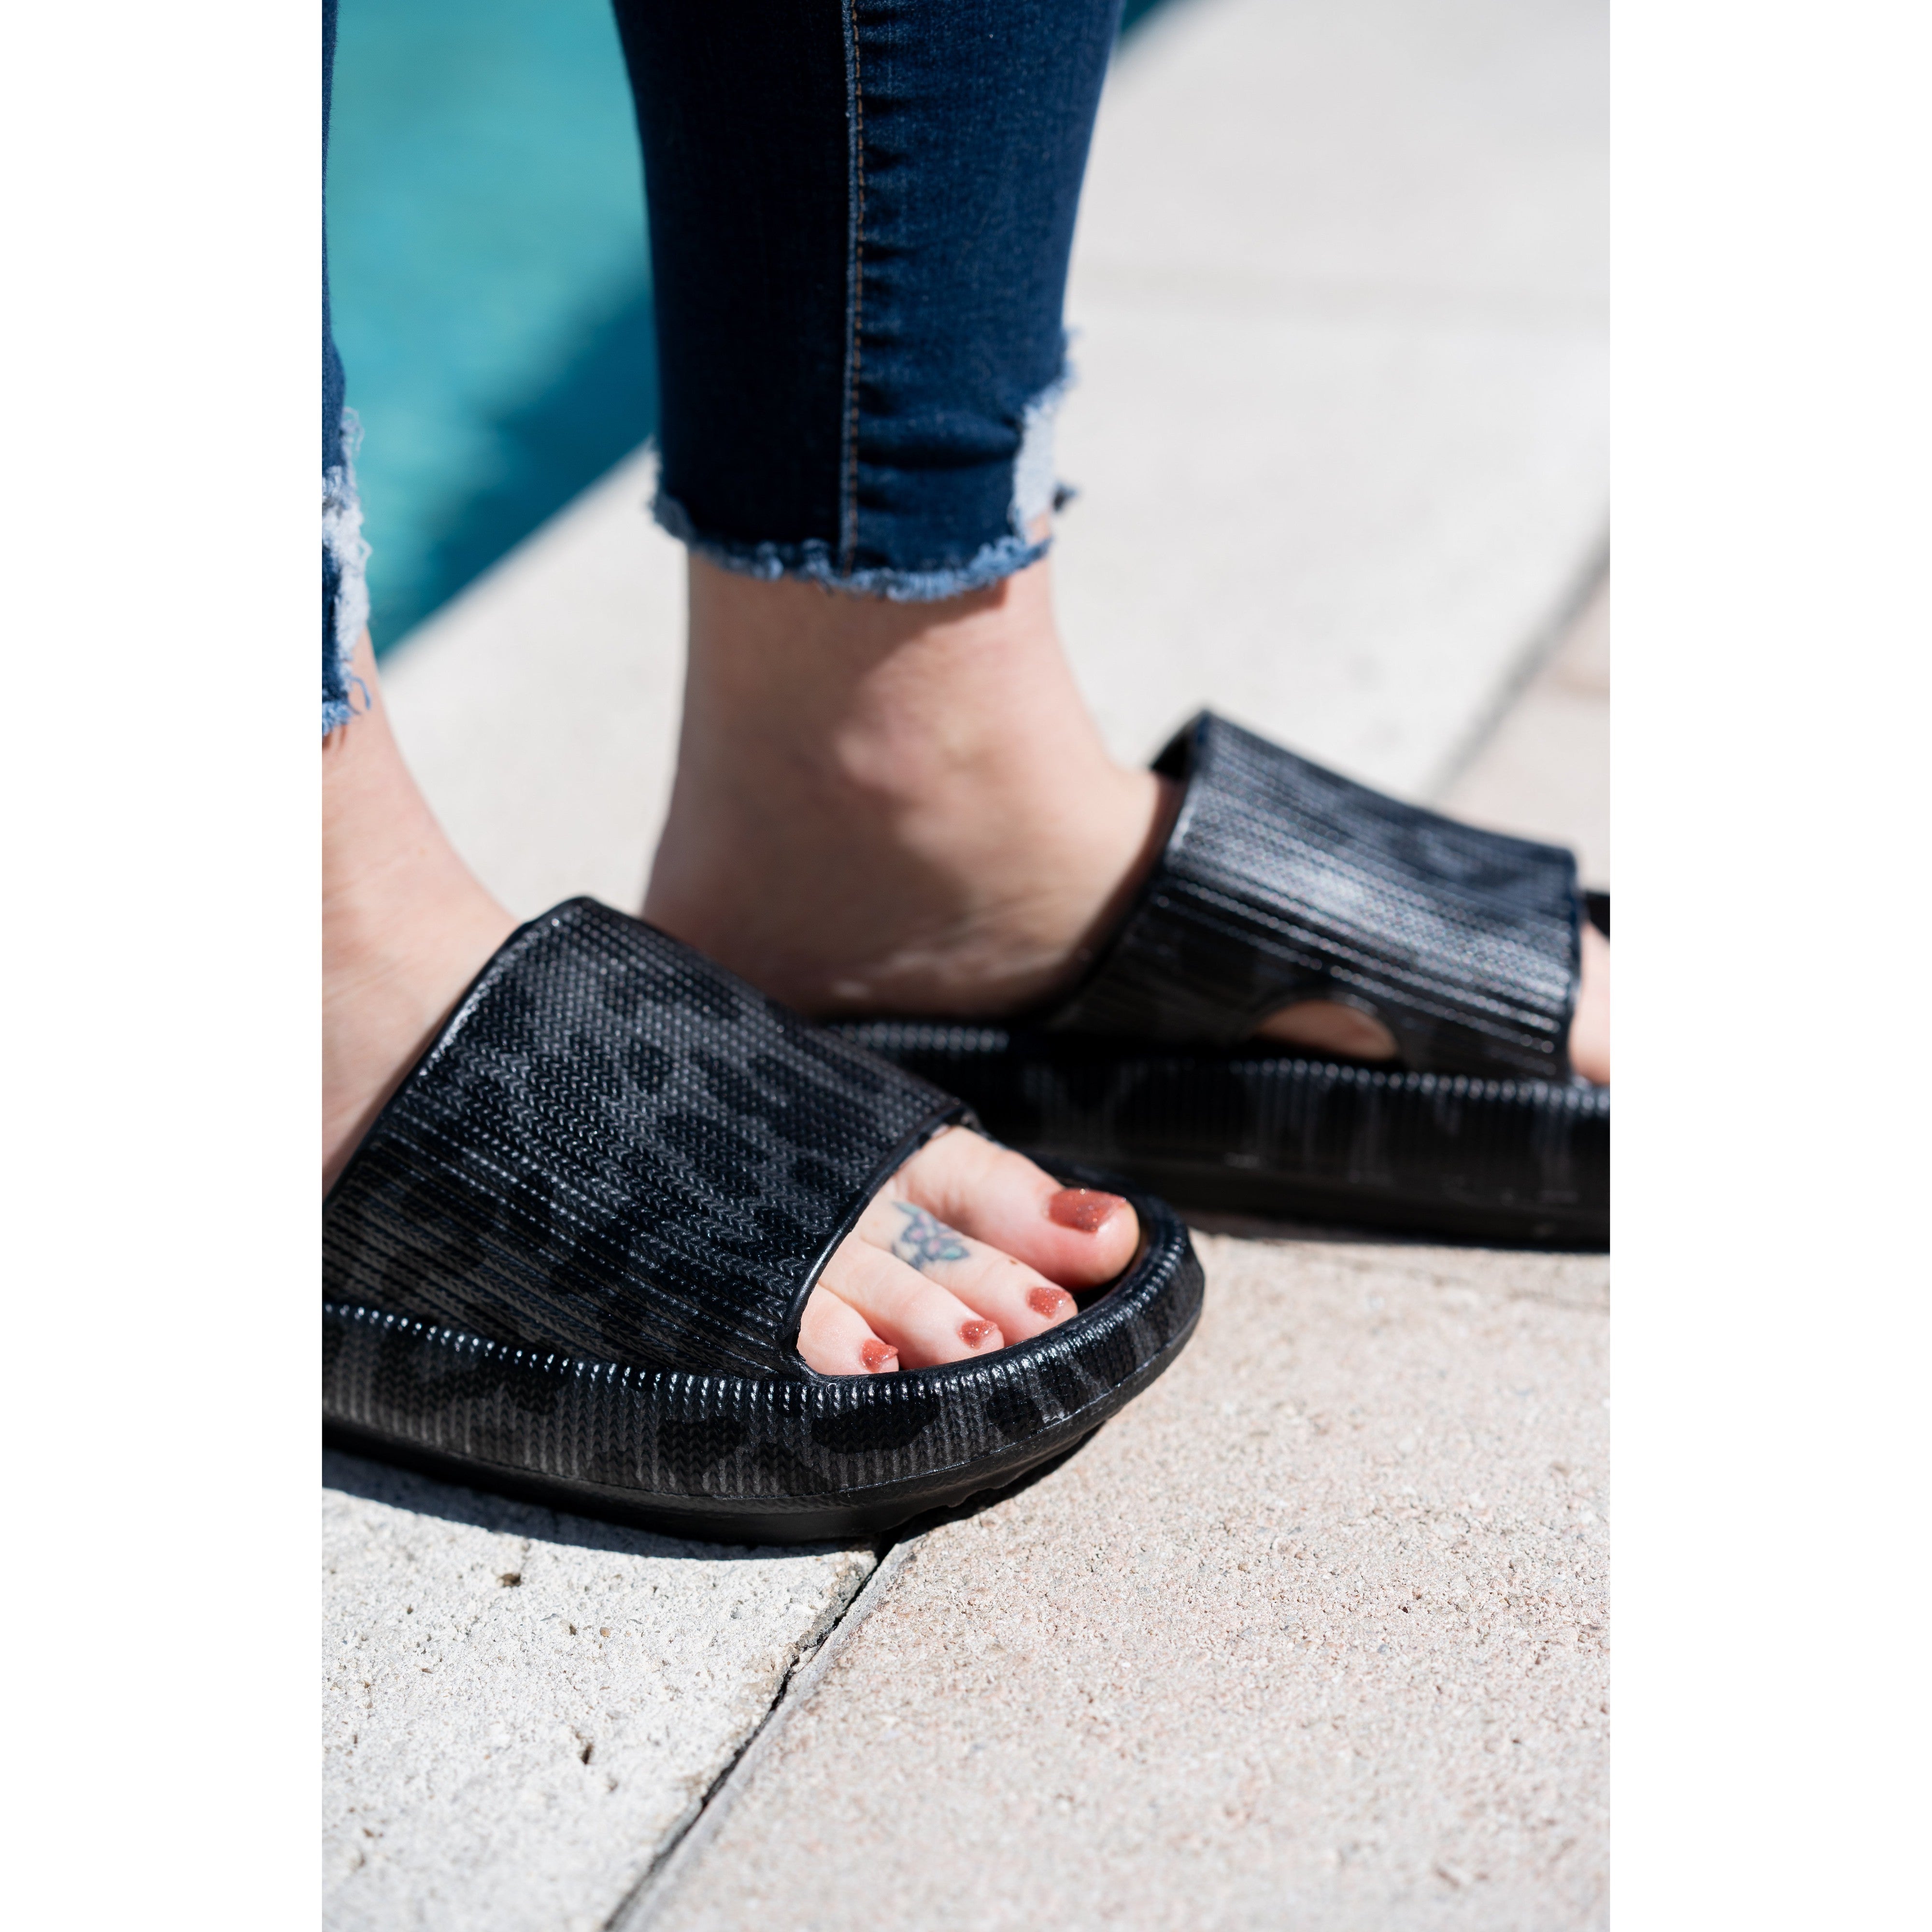 BLACK LEOPARD  Insanely Comfy - Beach or Casual Slides